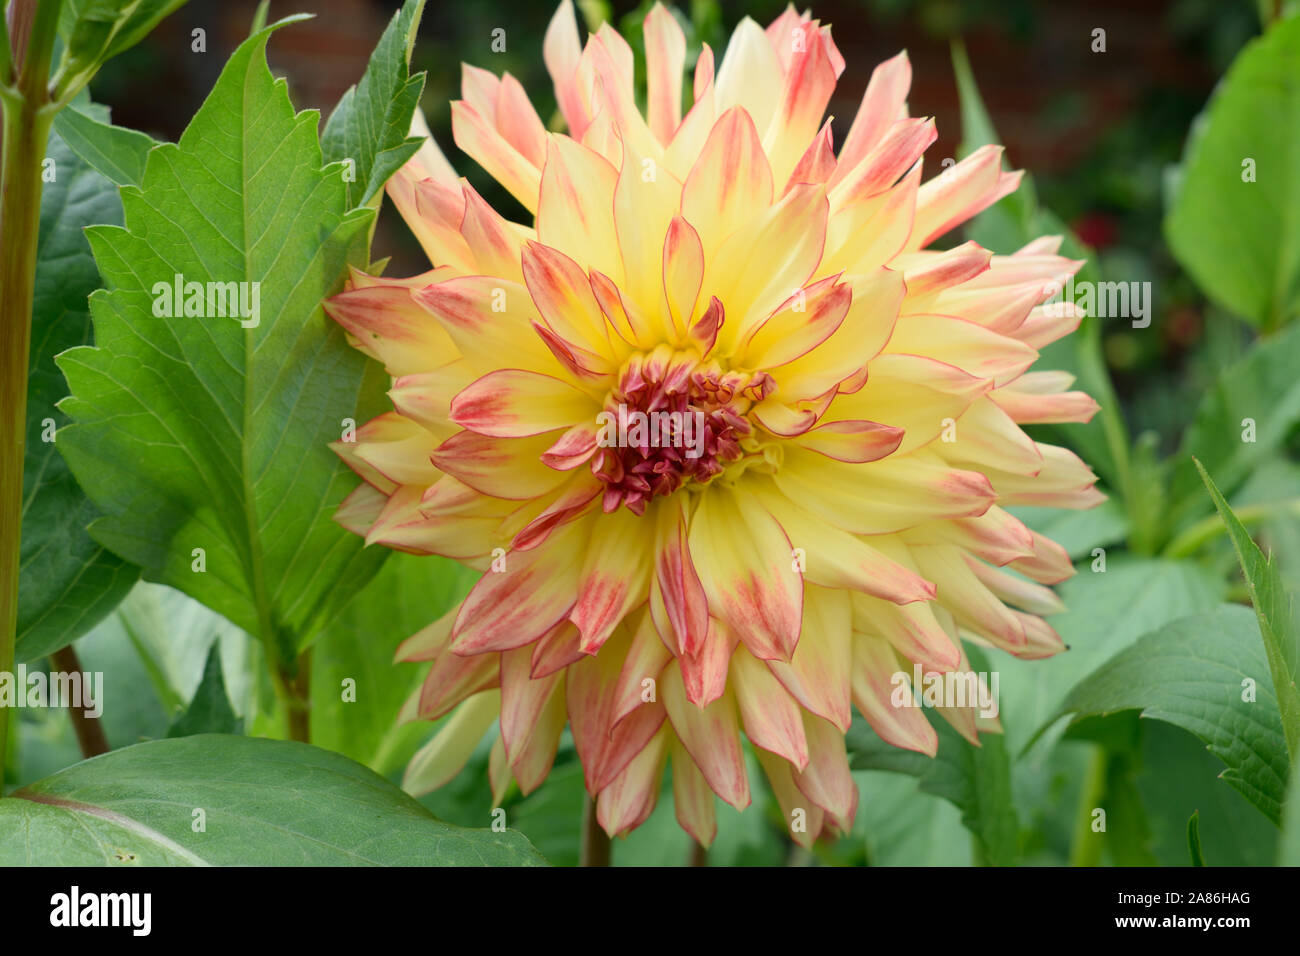 Dahlia. Semi cactus. Name Mon Amour. Closeup of large flower with yellow and pink petals. Stock Photo